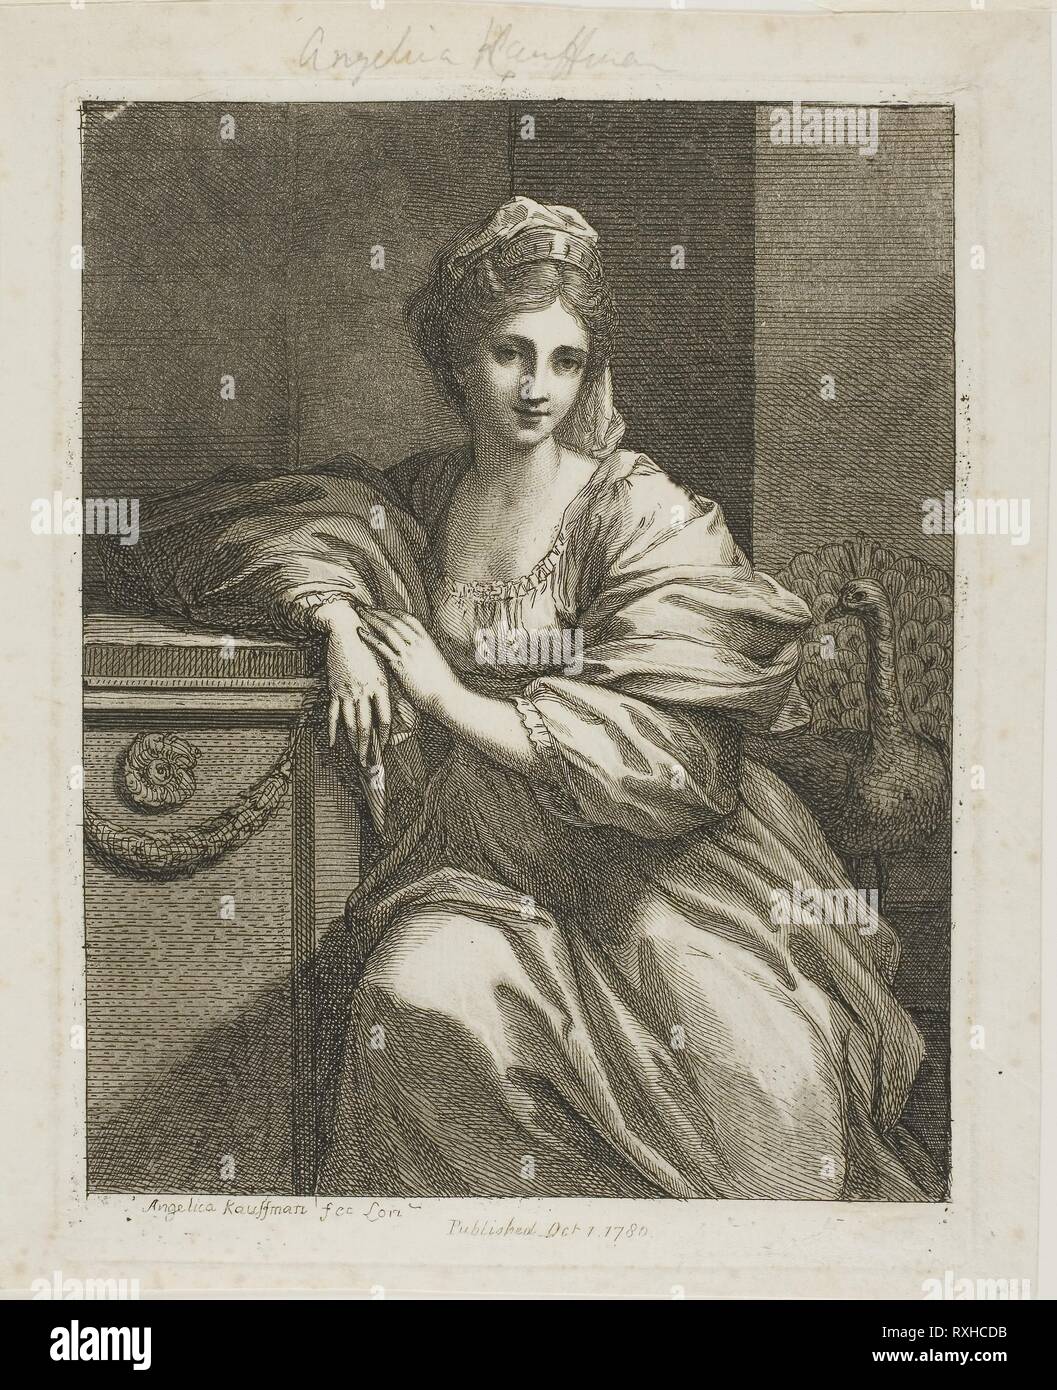 Juno and the Peacock. Angelica Kauffmann; Swiss, 1741-1807. Date: 1780. Dimensions: 205 x 167 mm (plate); 234 x 189 mm (sheet). Etching and aquatint on ivory laid paper. Origin: Switzerland. Museum: The Chicago Art Institute. Stock Photo